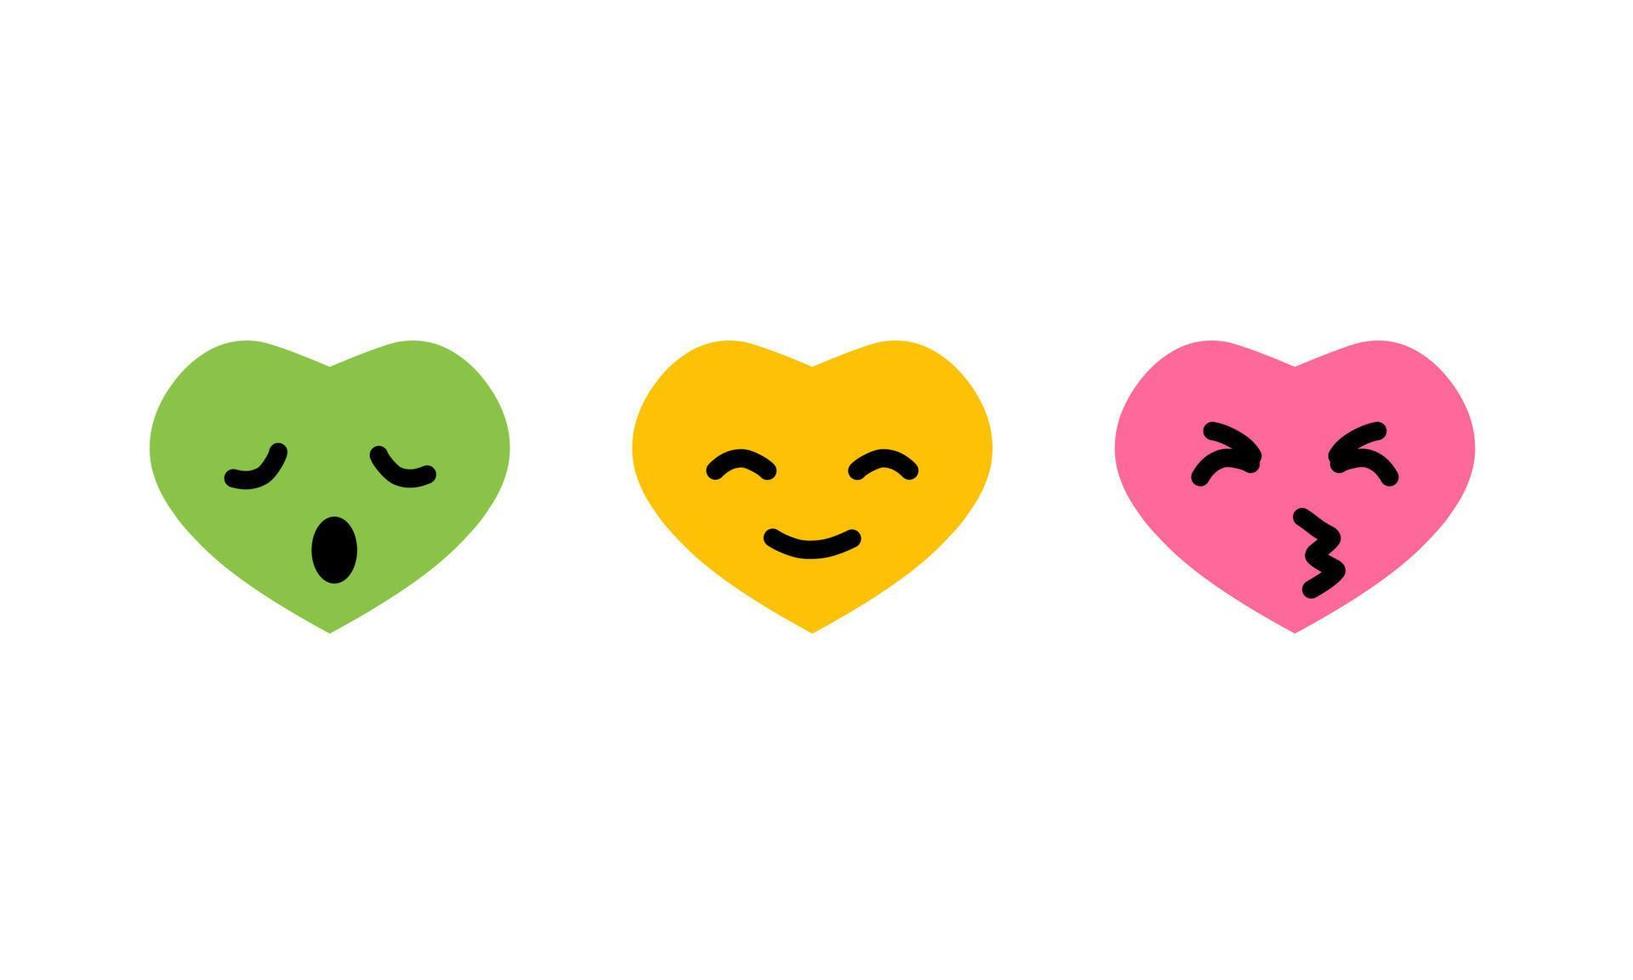 Three cute heart shape expression with different feelings color for web or print design element vector